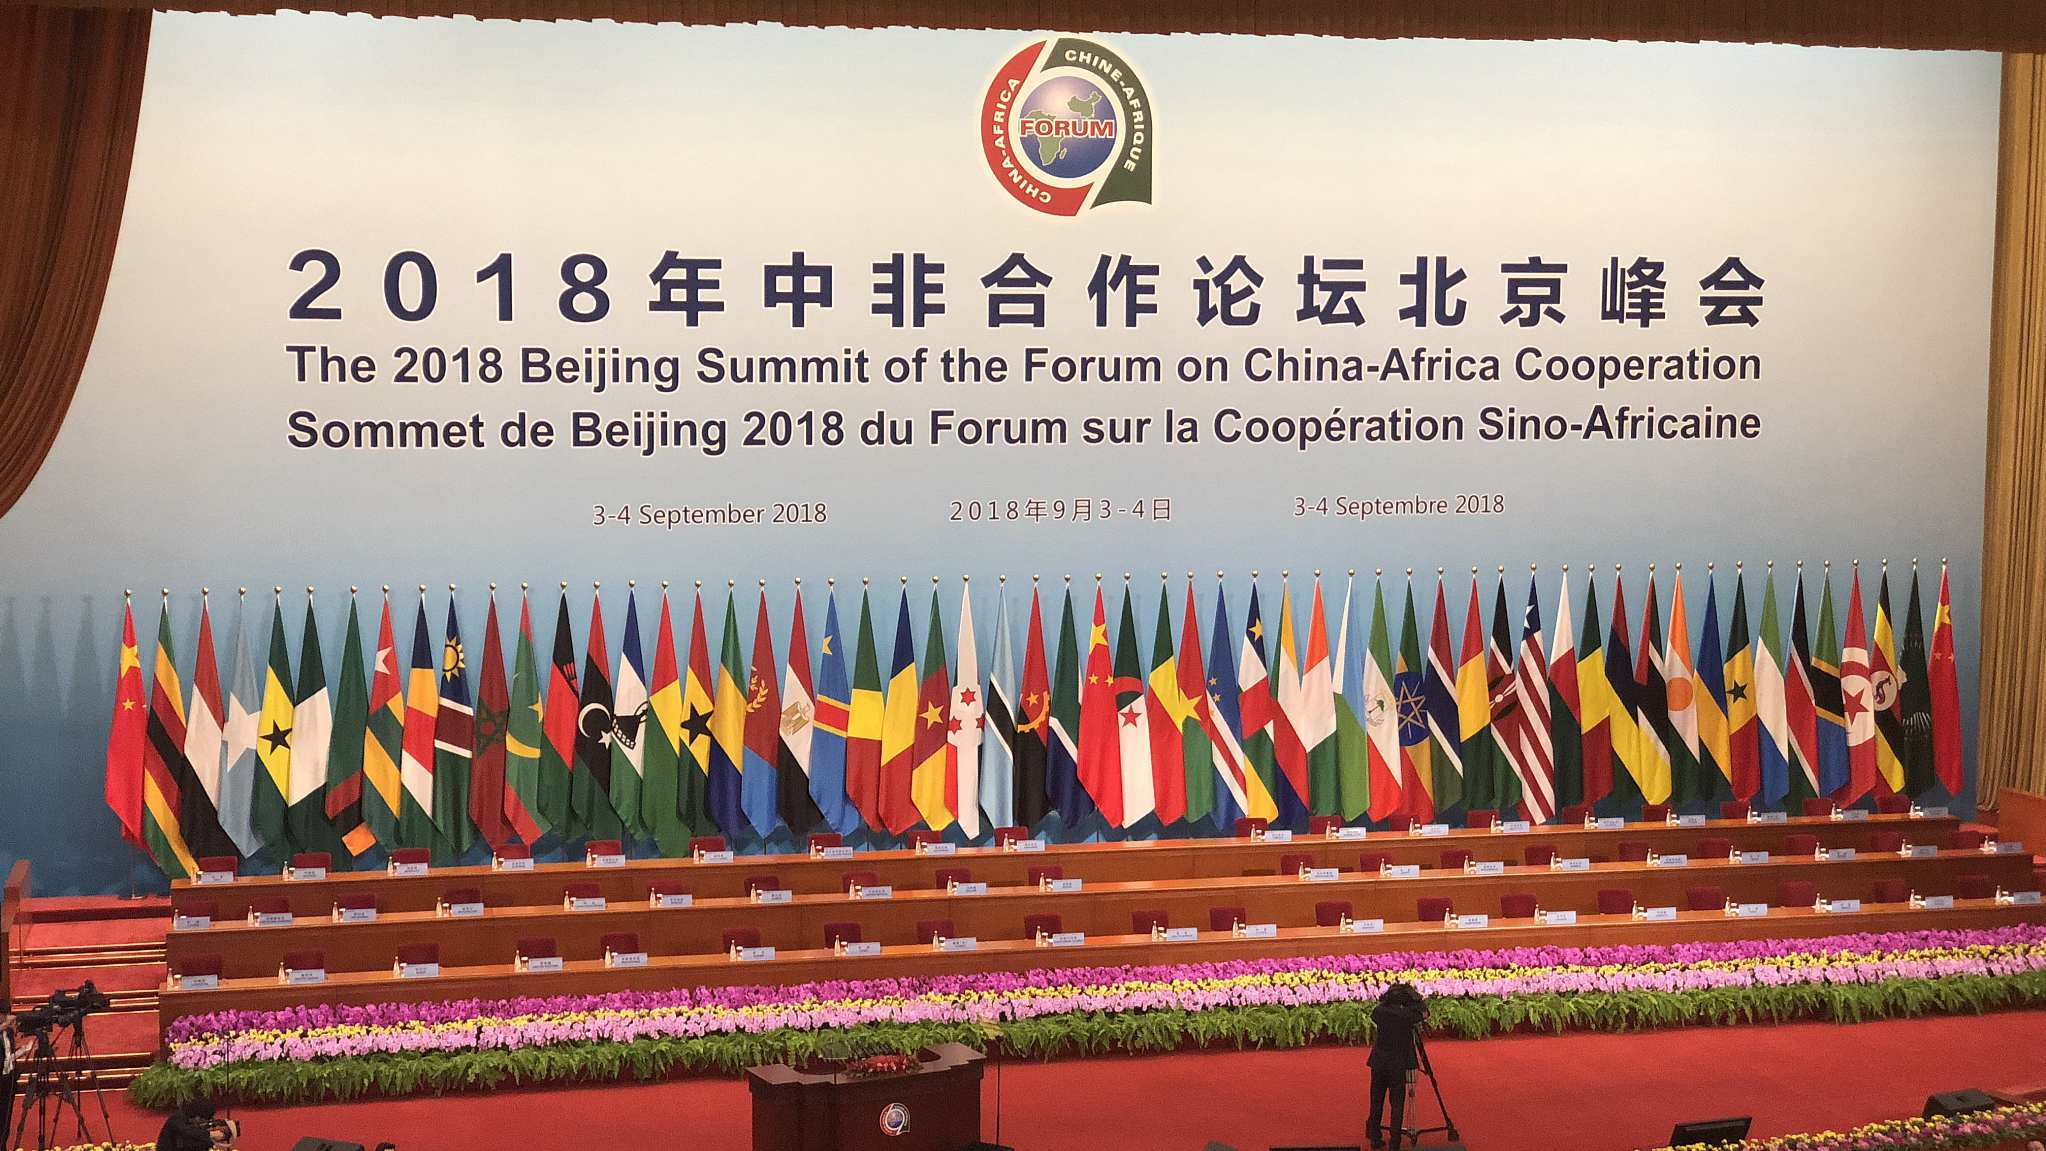 China's vision and mission for China-Africa cooperation